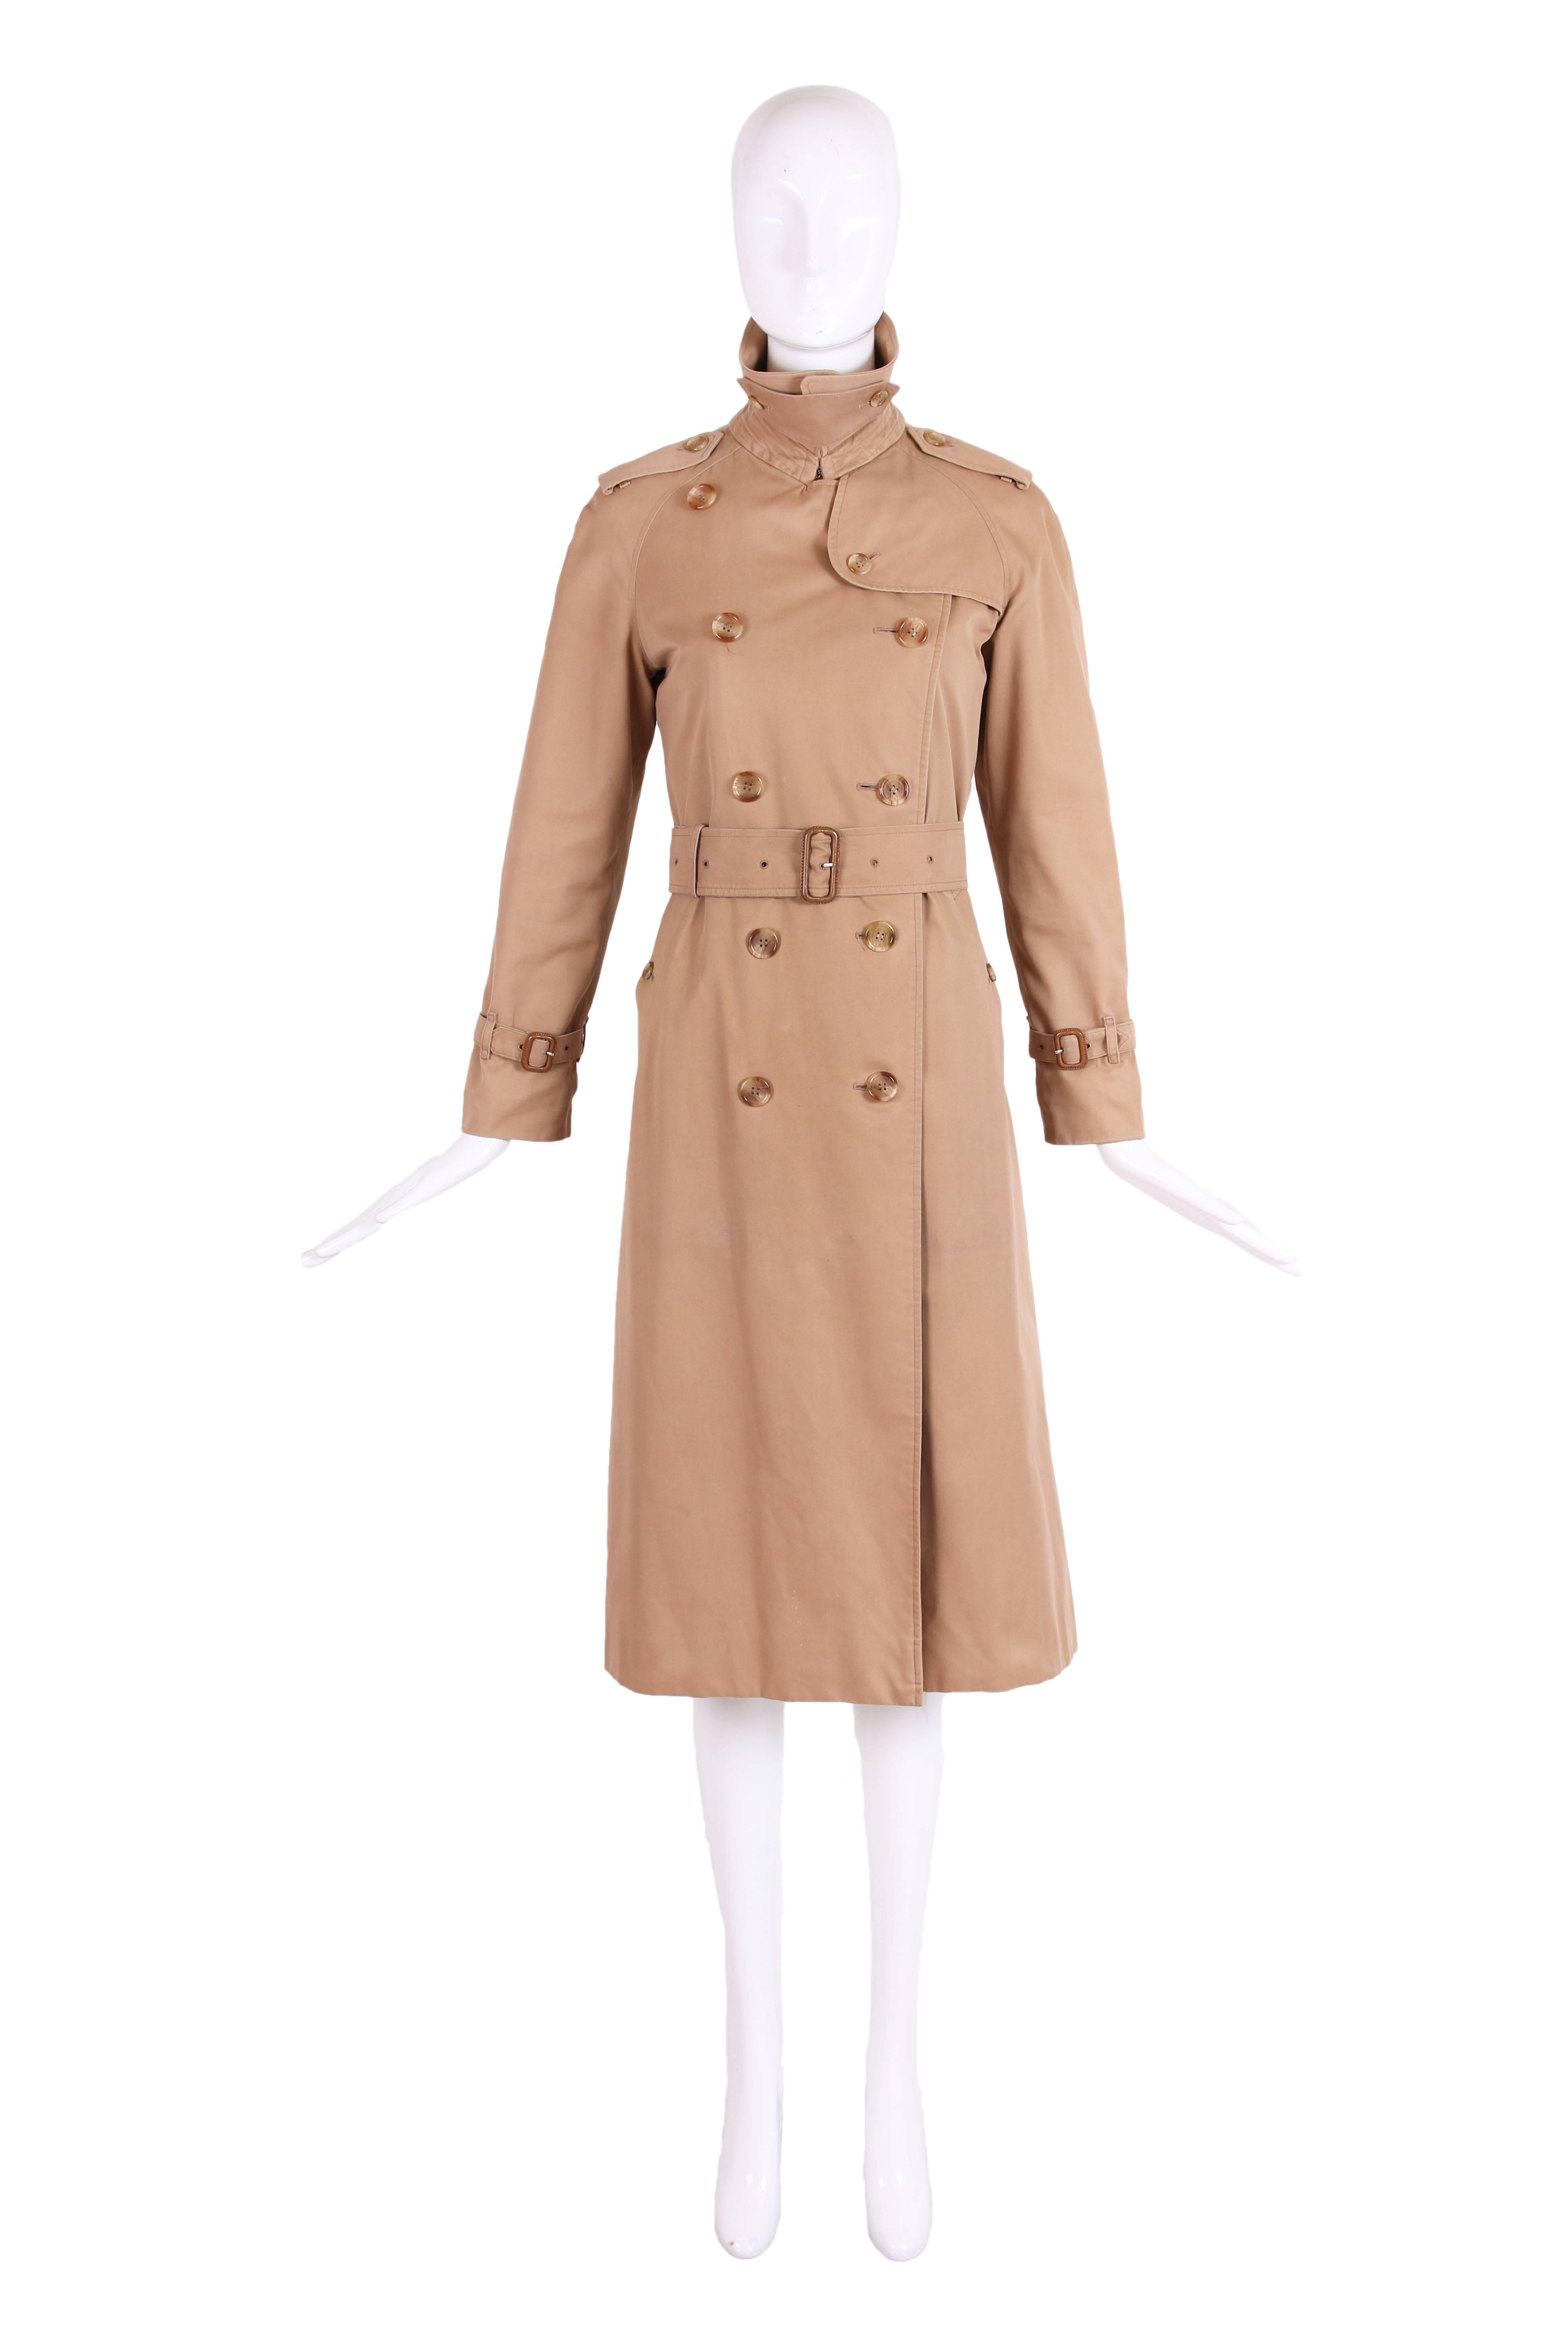 Classic vintage Burberry belted trench coat in camel and belt with leather covered buckle. Interior lining in plaid cotton with a detachable zippered plaid wool lining layered on top of that. In excellent condition. No size tag - this will most